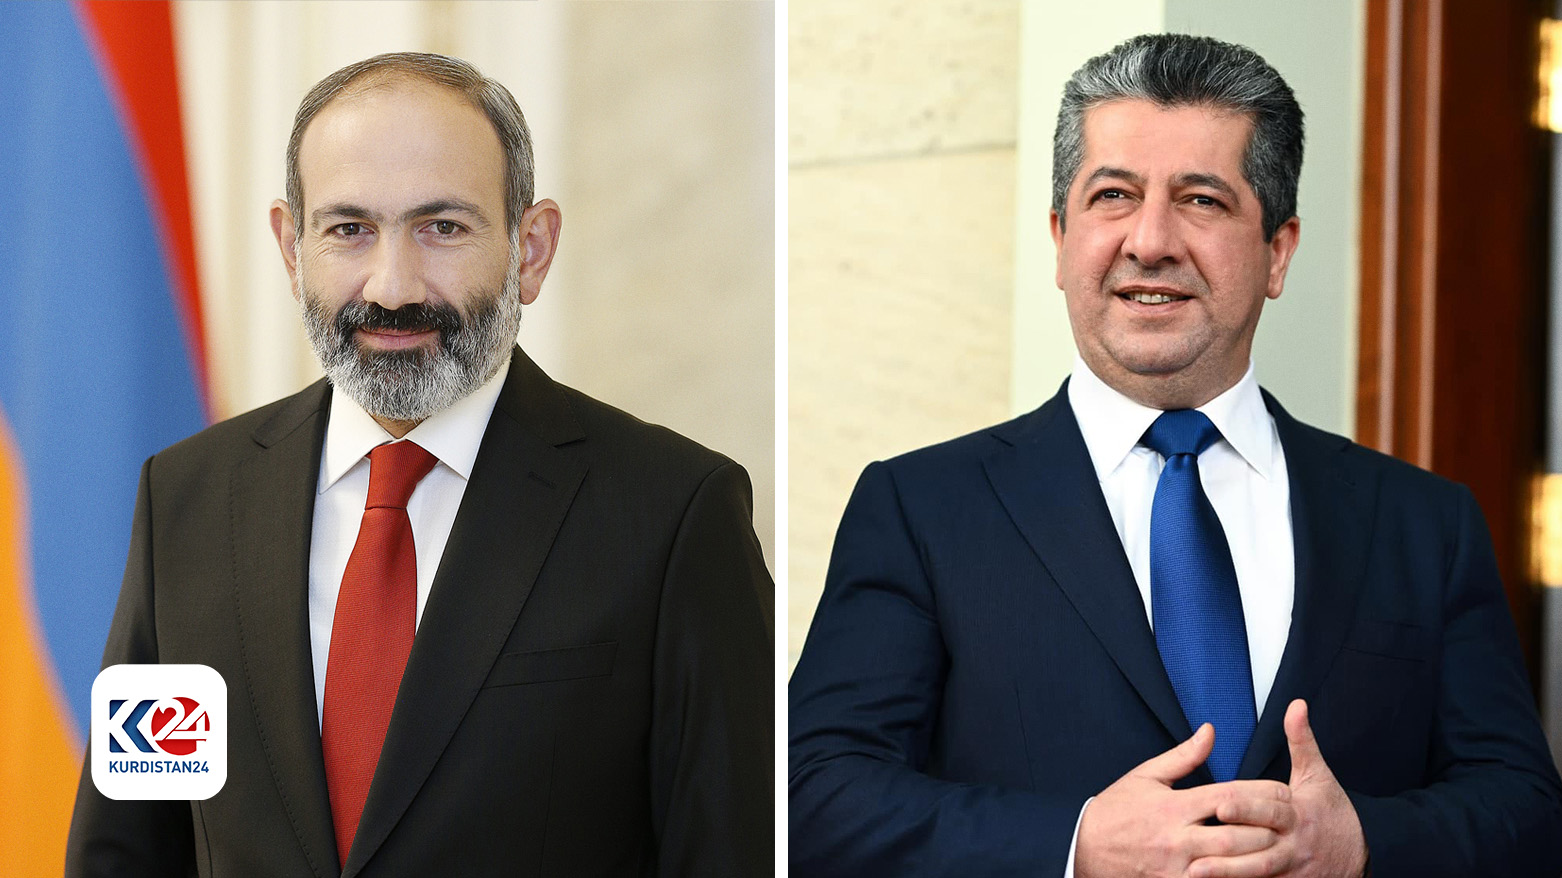 PM Barzani receives heartfelt wishes from global leaders during Ramadan